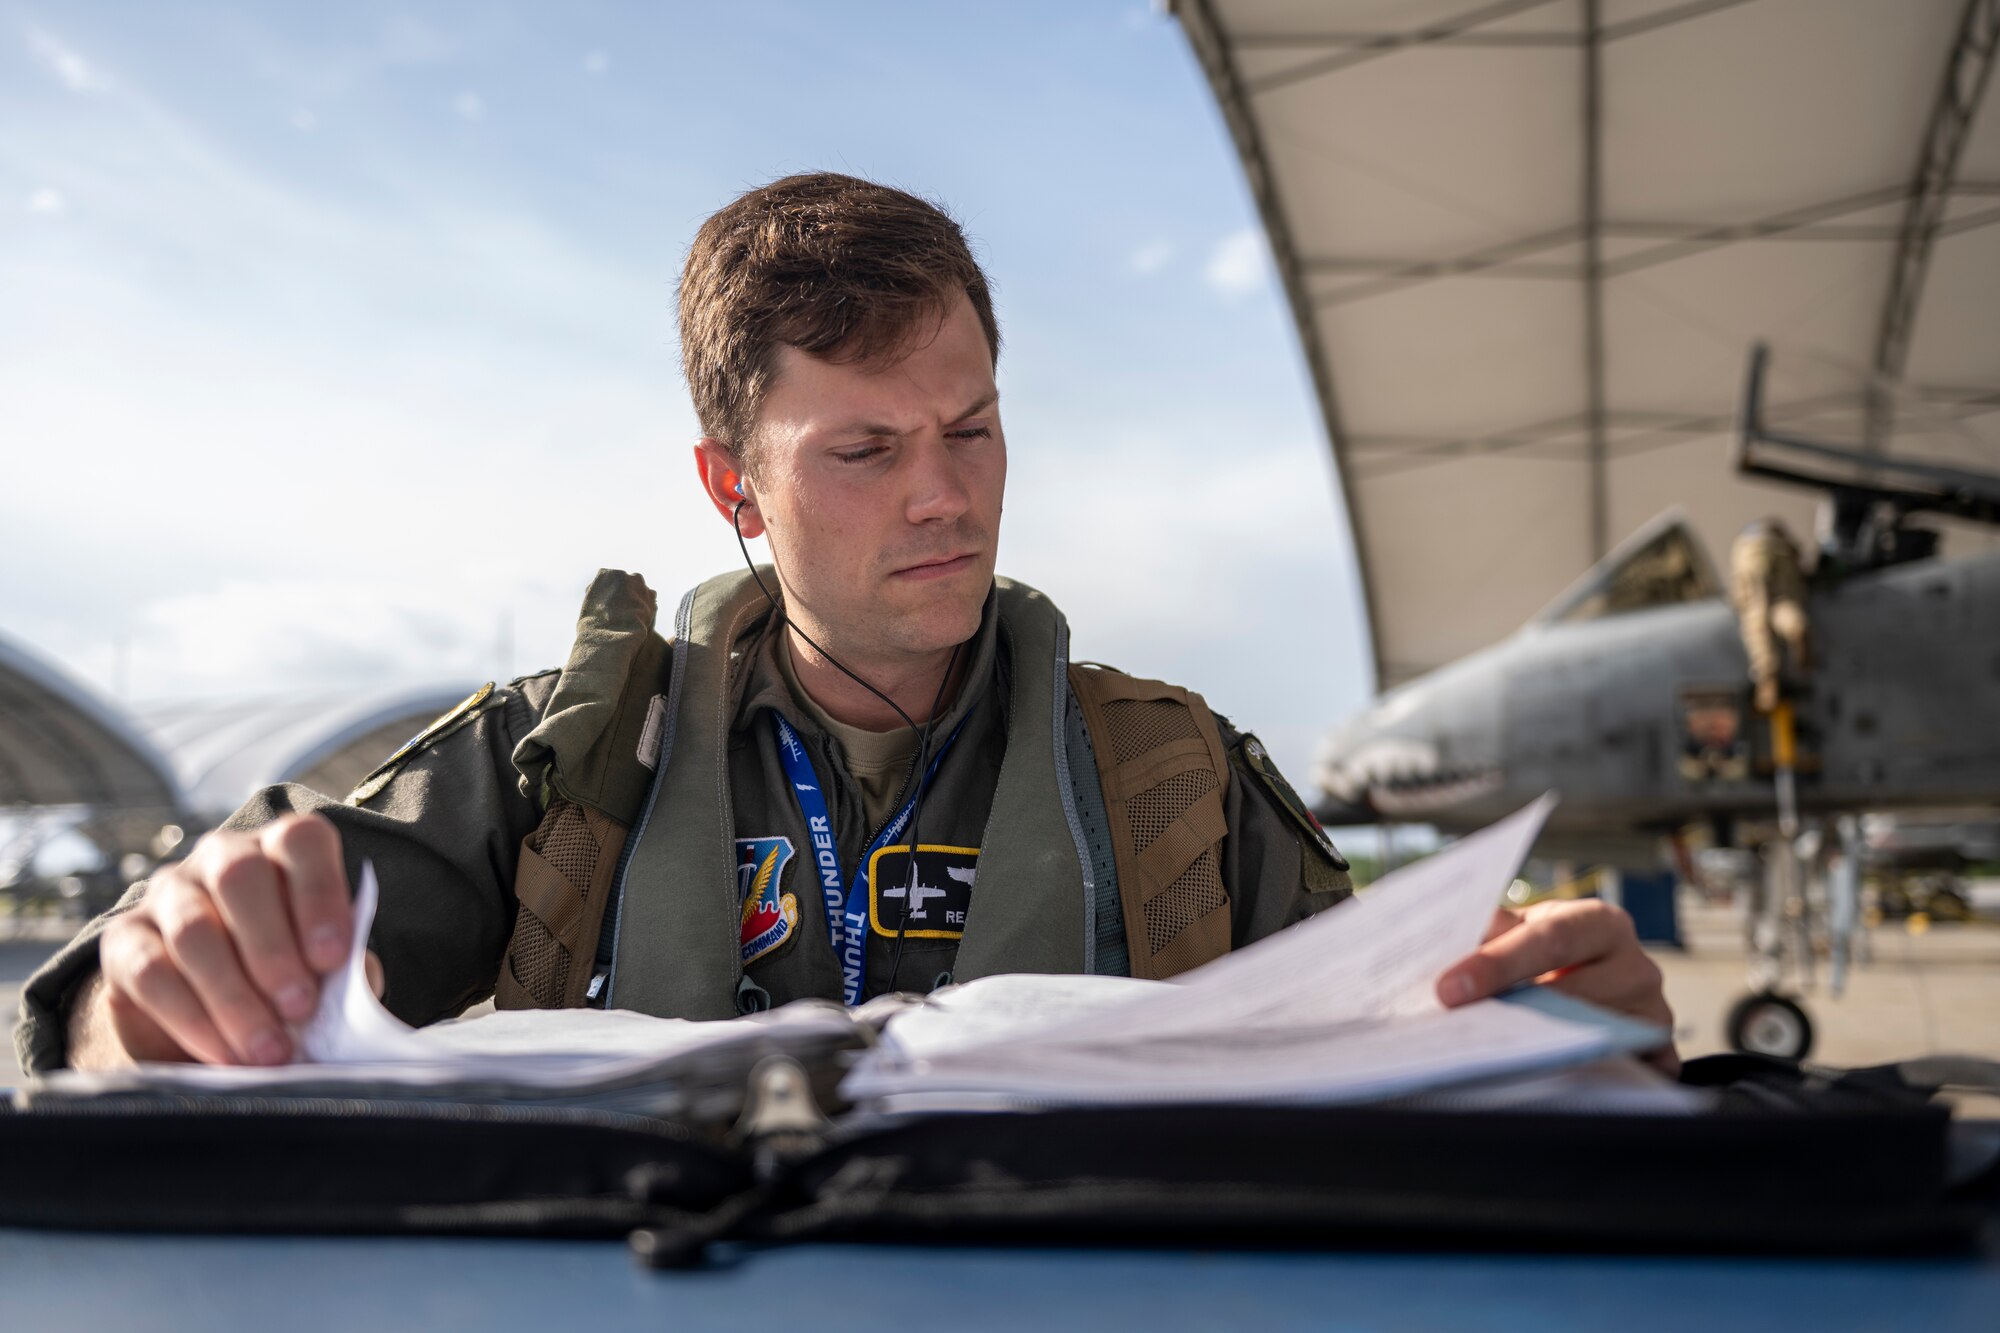 U.S. Air Force Capt. Riley Nix, 74th Fighter Squadron A-10C Thunderbolt II pilot, reviews maintenance logs during Exercise Ready Tiger 24-1 at Moody Air Force Base, Georgia, April 10, 2024. A-10s have excellent maneuverability at low air speeds and altitude and are highly accurate weapons-delivery platforms. Ready Tiger 24-1 is a readiness exercise demonstrating the 23rd Wing’s ability to plan, prepare and execute operations and maintenance to project air power in contested and dispersed locations, defending the United States’ interests and allies. (U.S. Air Force photo by Senior Airman Deanna Muir)